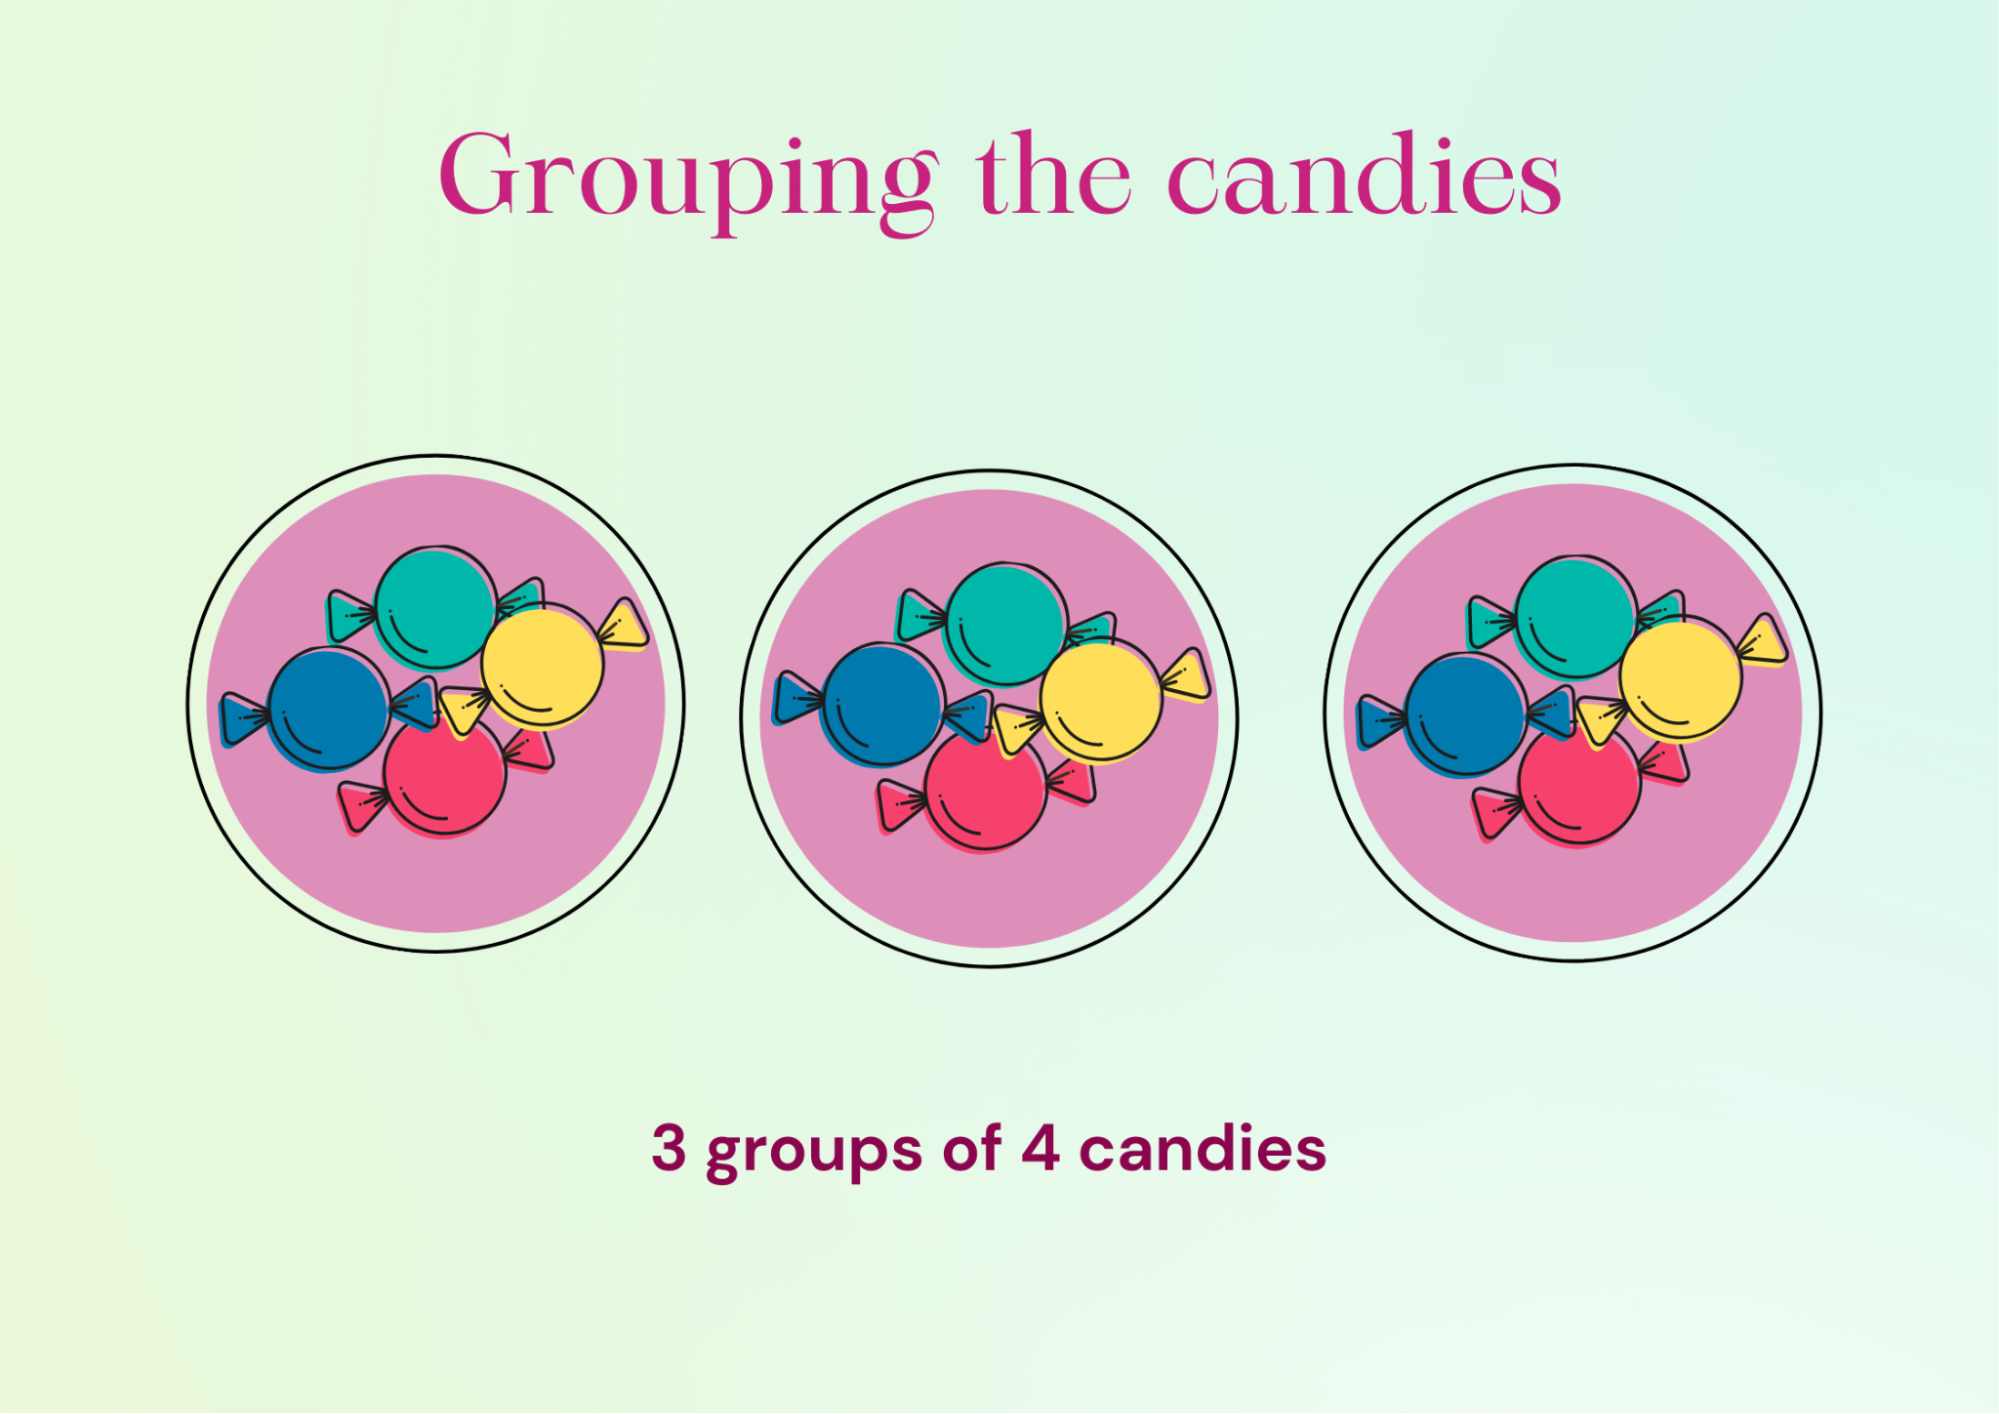 Image Shows Three Groups Each of Four Candies